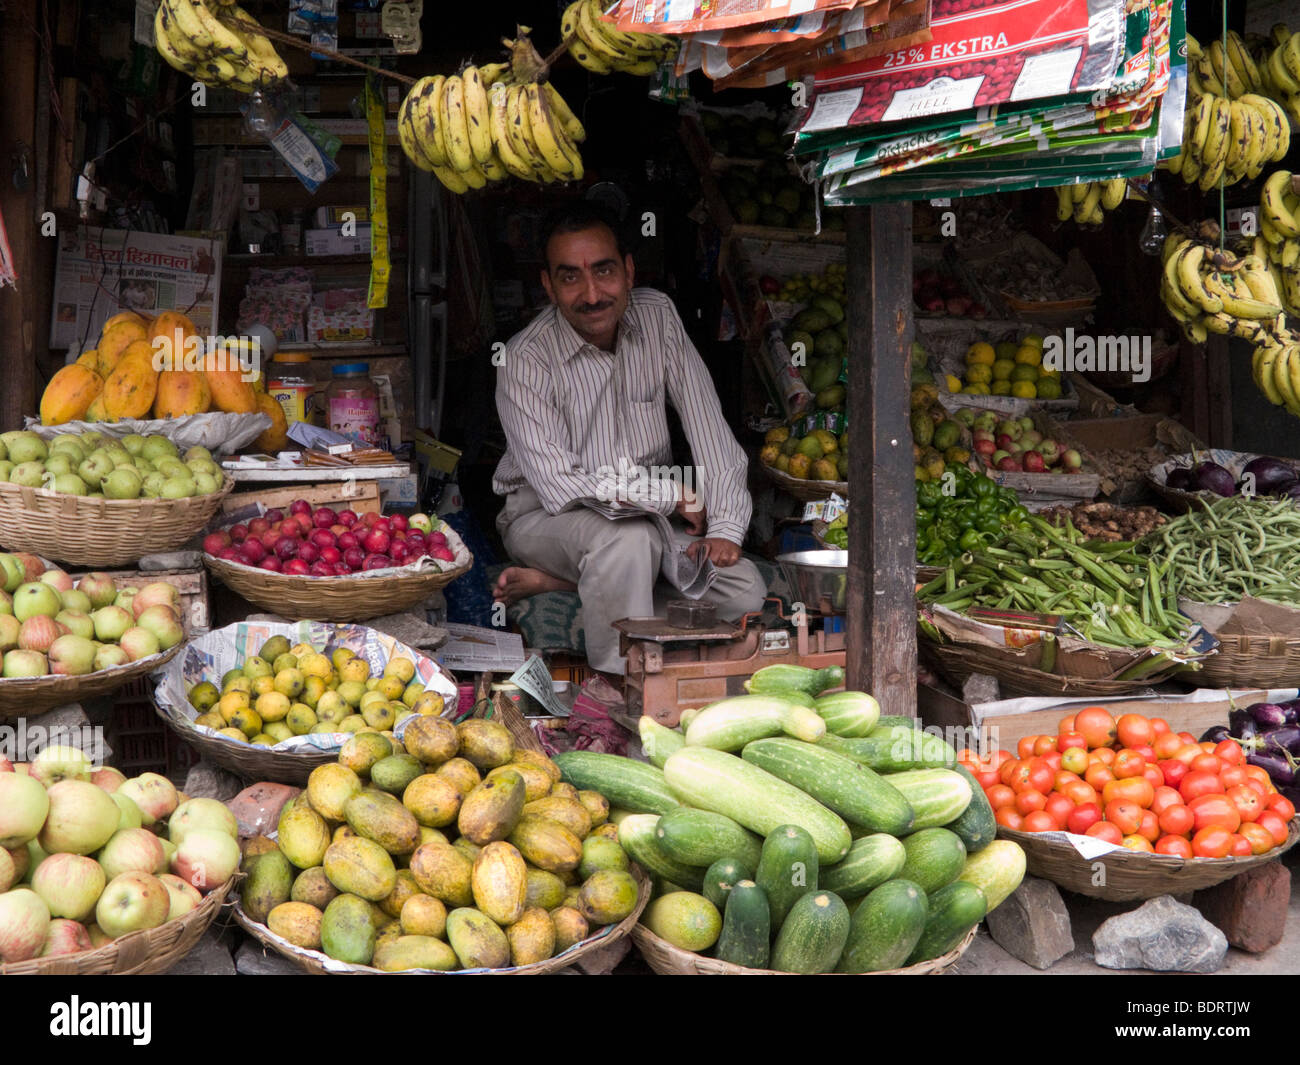 Street market shop seller with his quality fresh fruit and vegetables. Street market stall. Dalhousie. Himachal Pradesh. India. Stock Photo